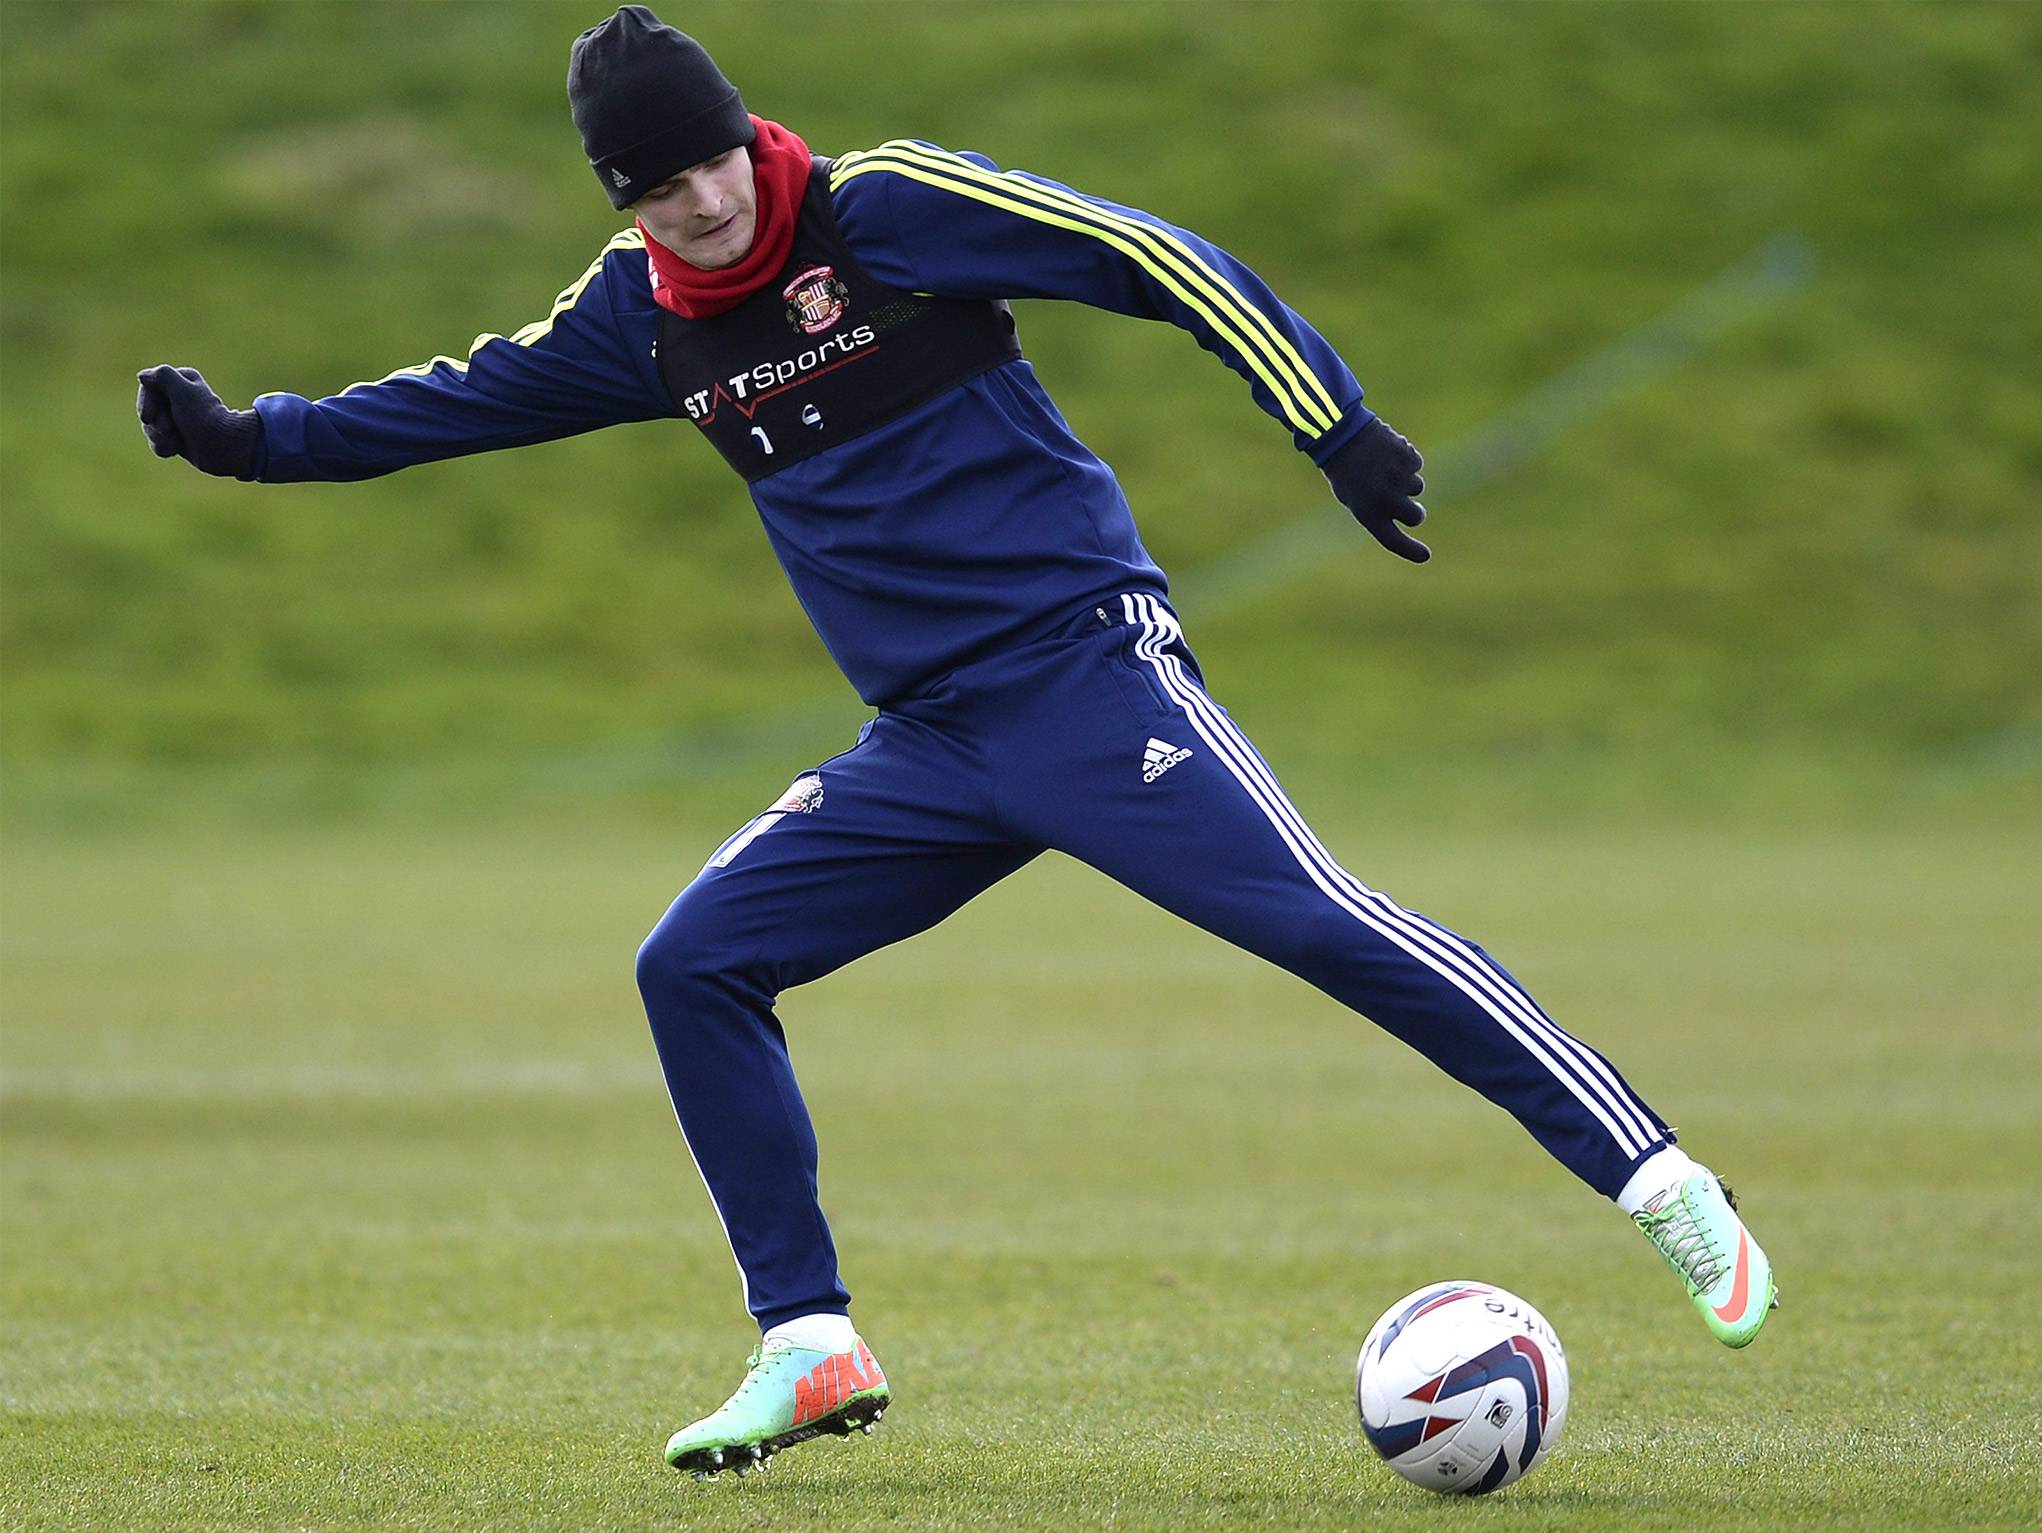 Adam Johnson controls the ball during a training session with Sunderland